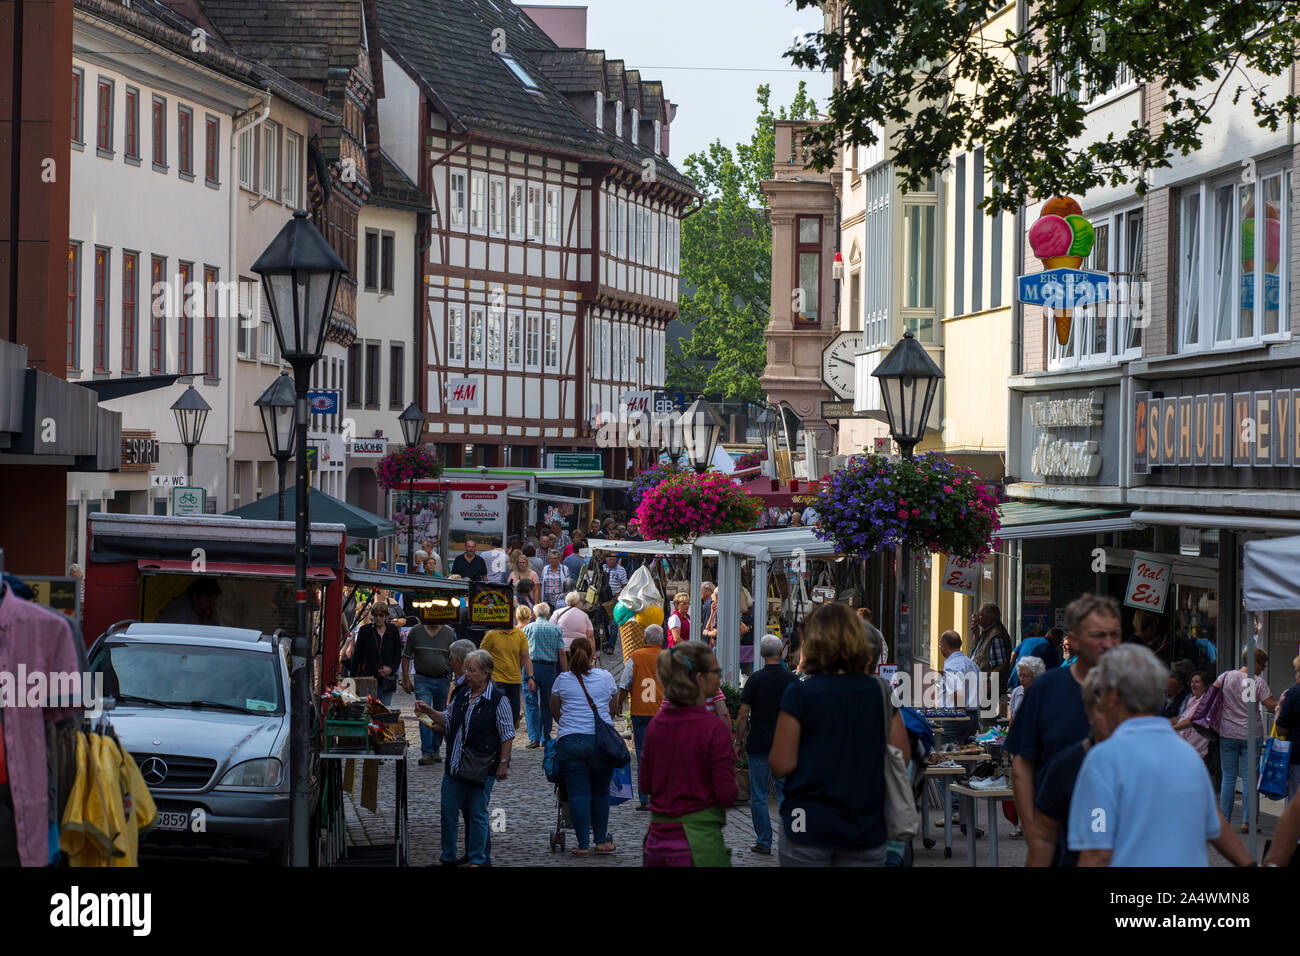 Höxter city centre, shopping street in the old town, Marktstreet, Stock Photo